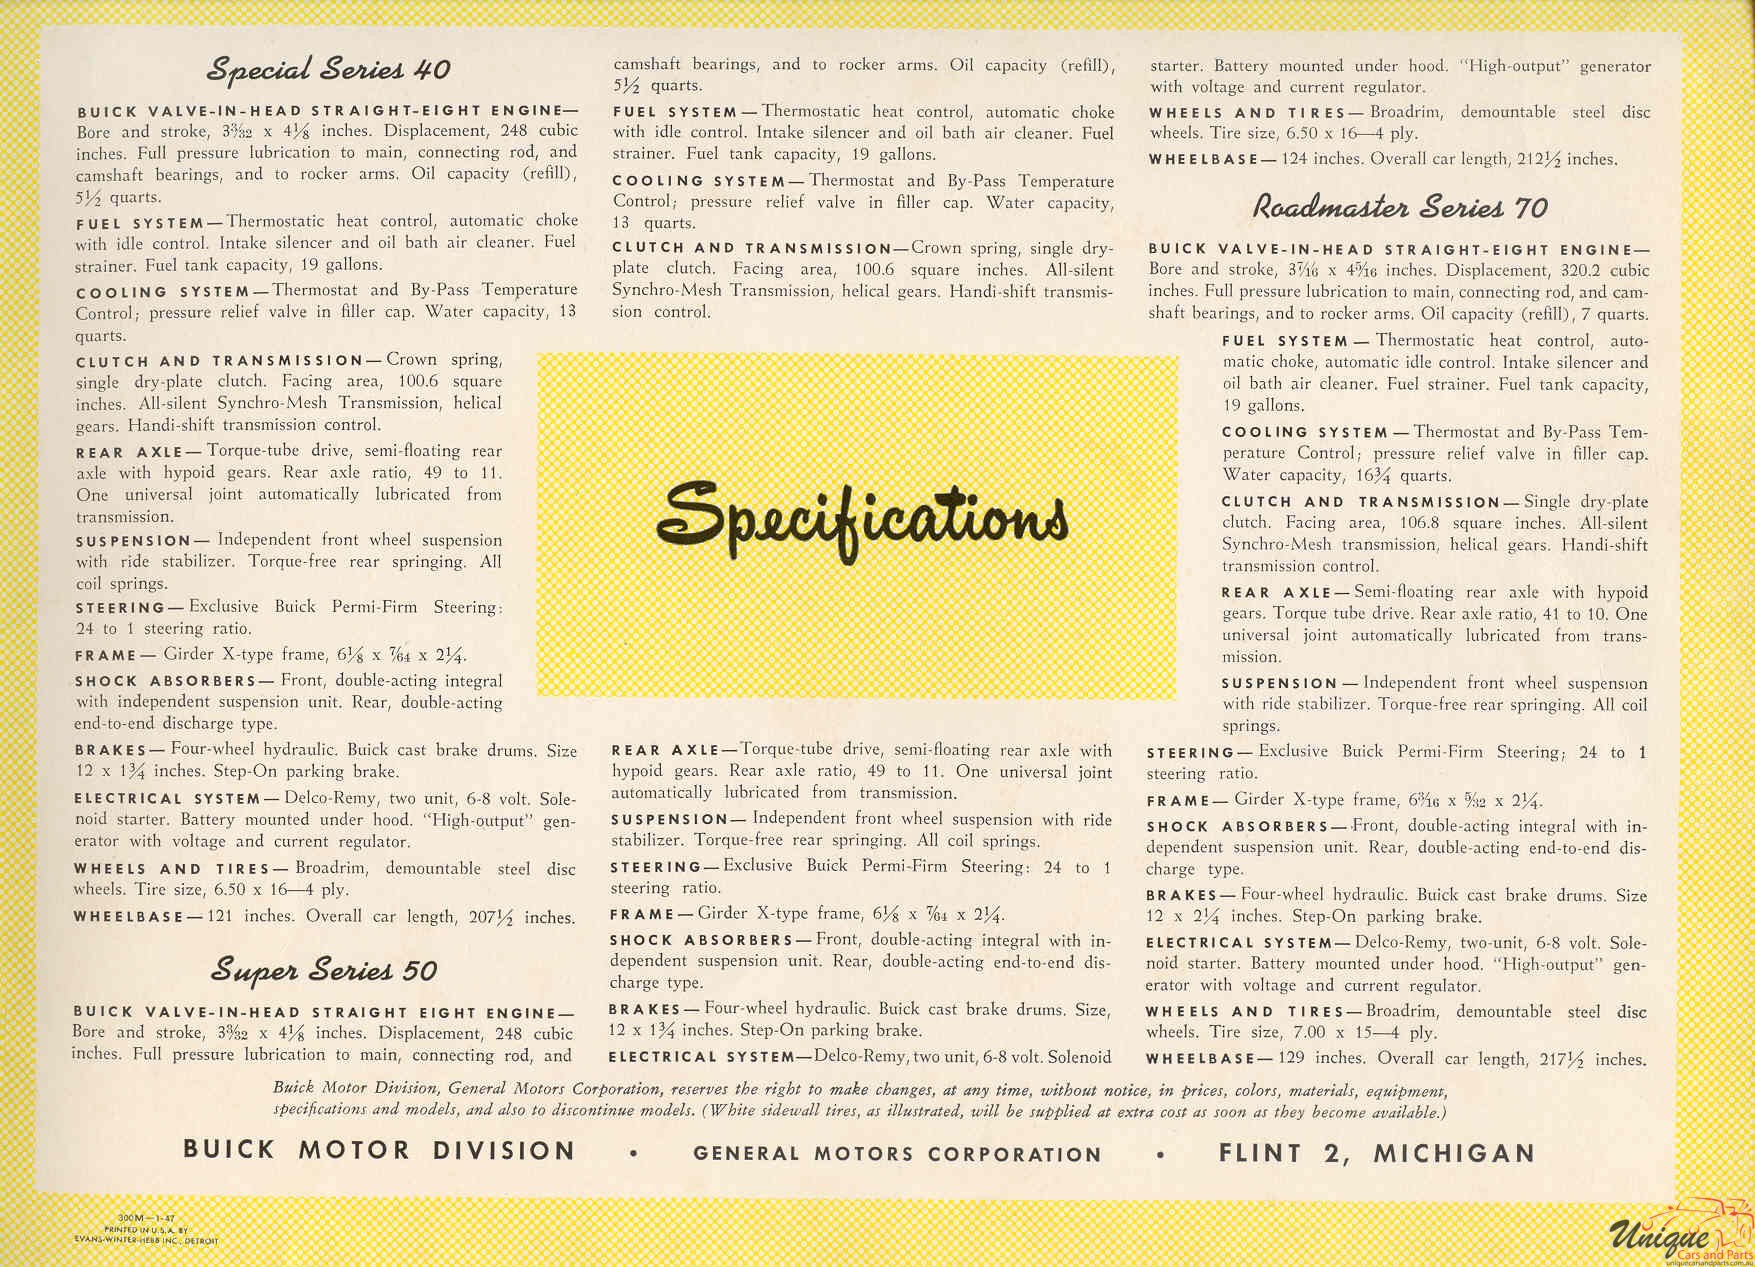 1947 Buick Brochure Page 18